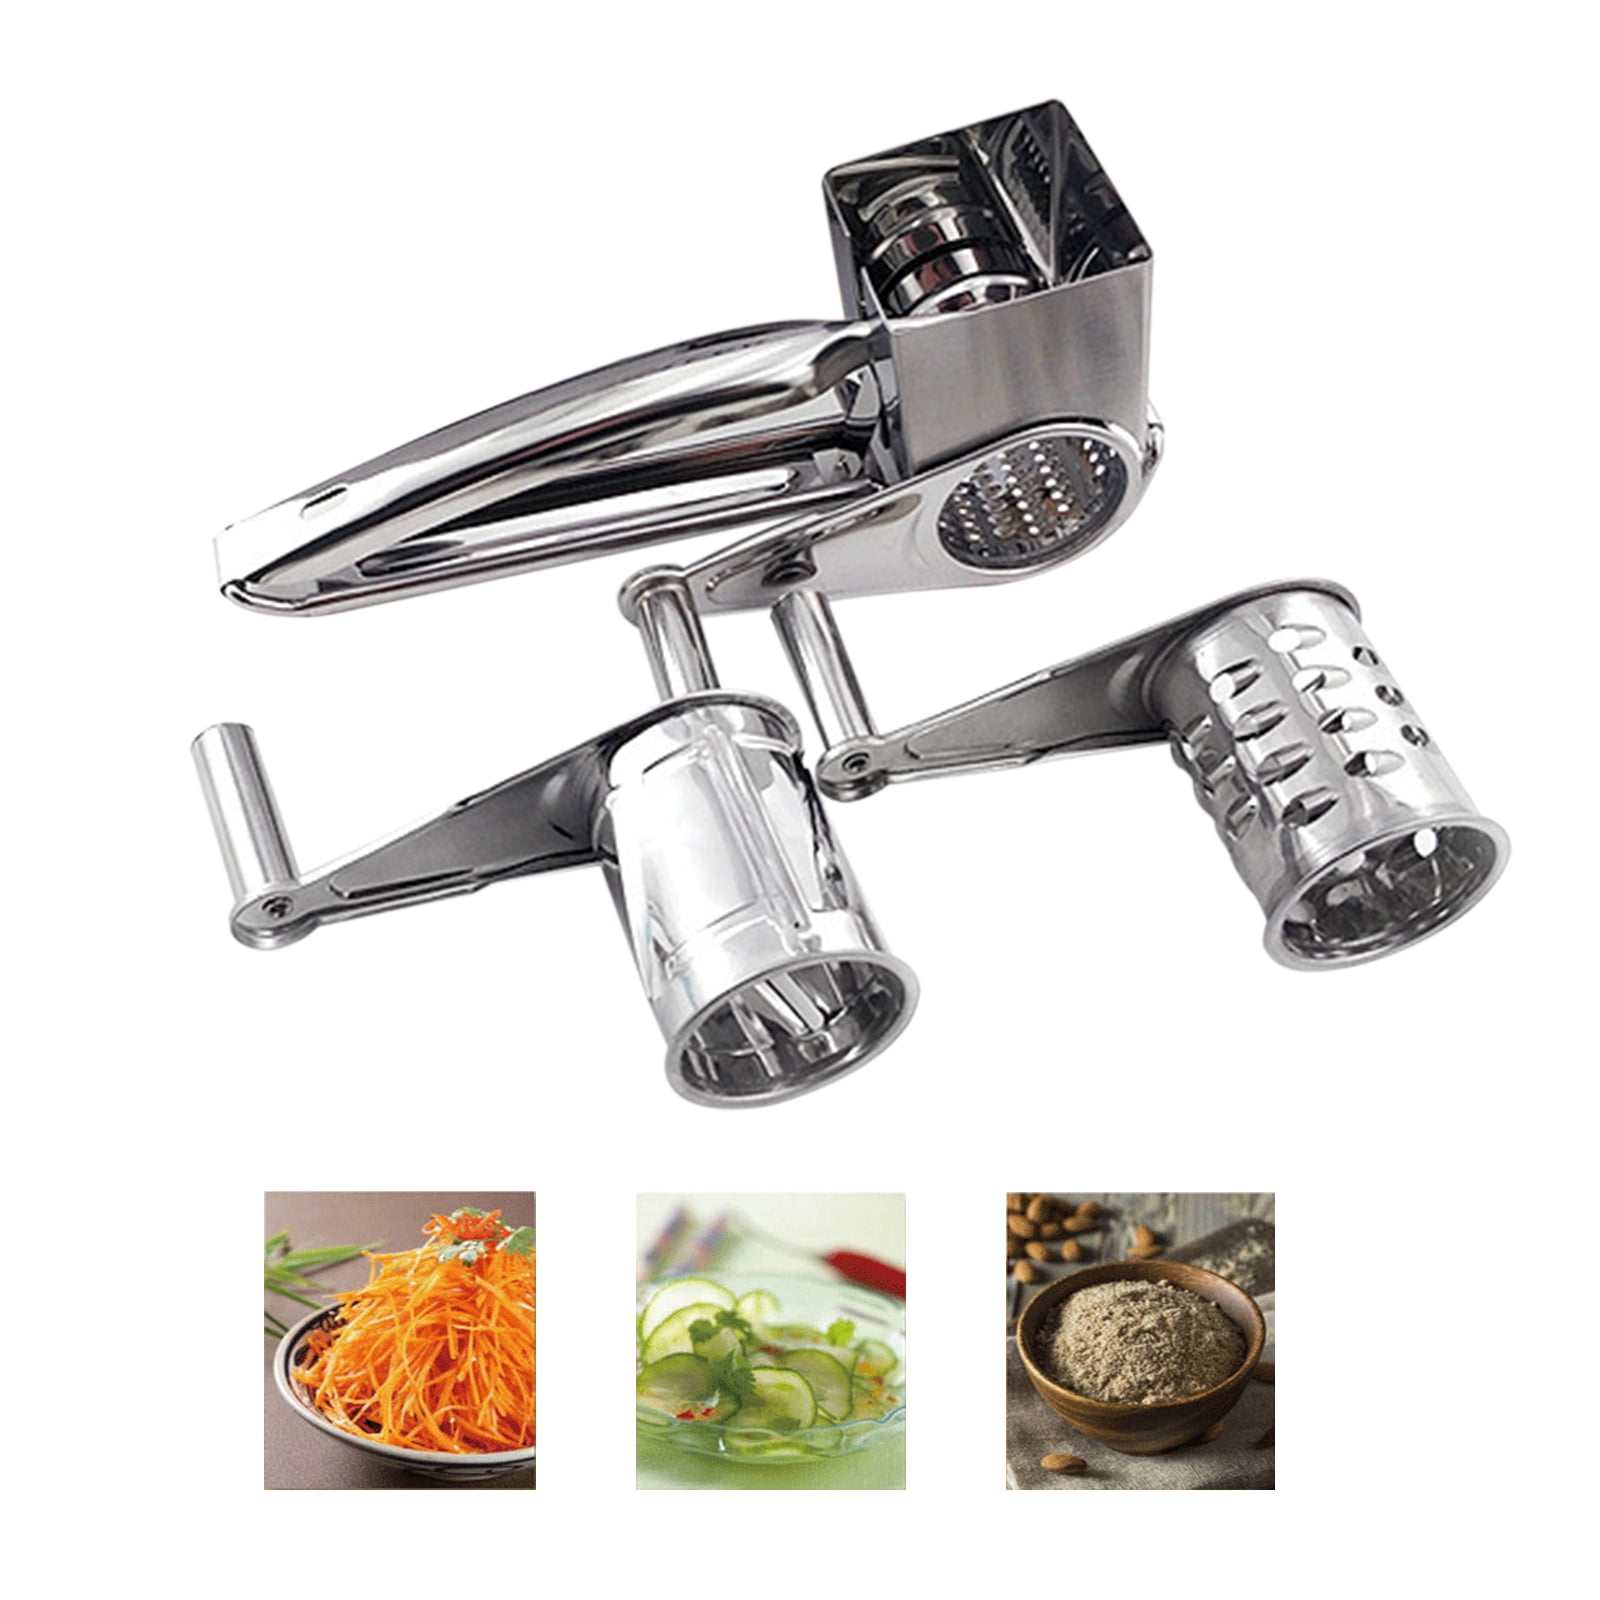 Rotary Cheese Grater Manual Handheld Cheese Grater with Stainless Steel  Drum for Grating Hard Cheese Chocolate Nuts Kitchen Tool (/, White, 1)